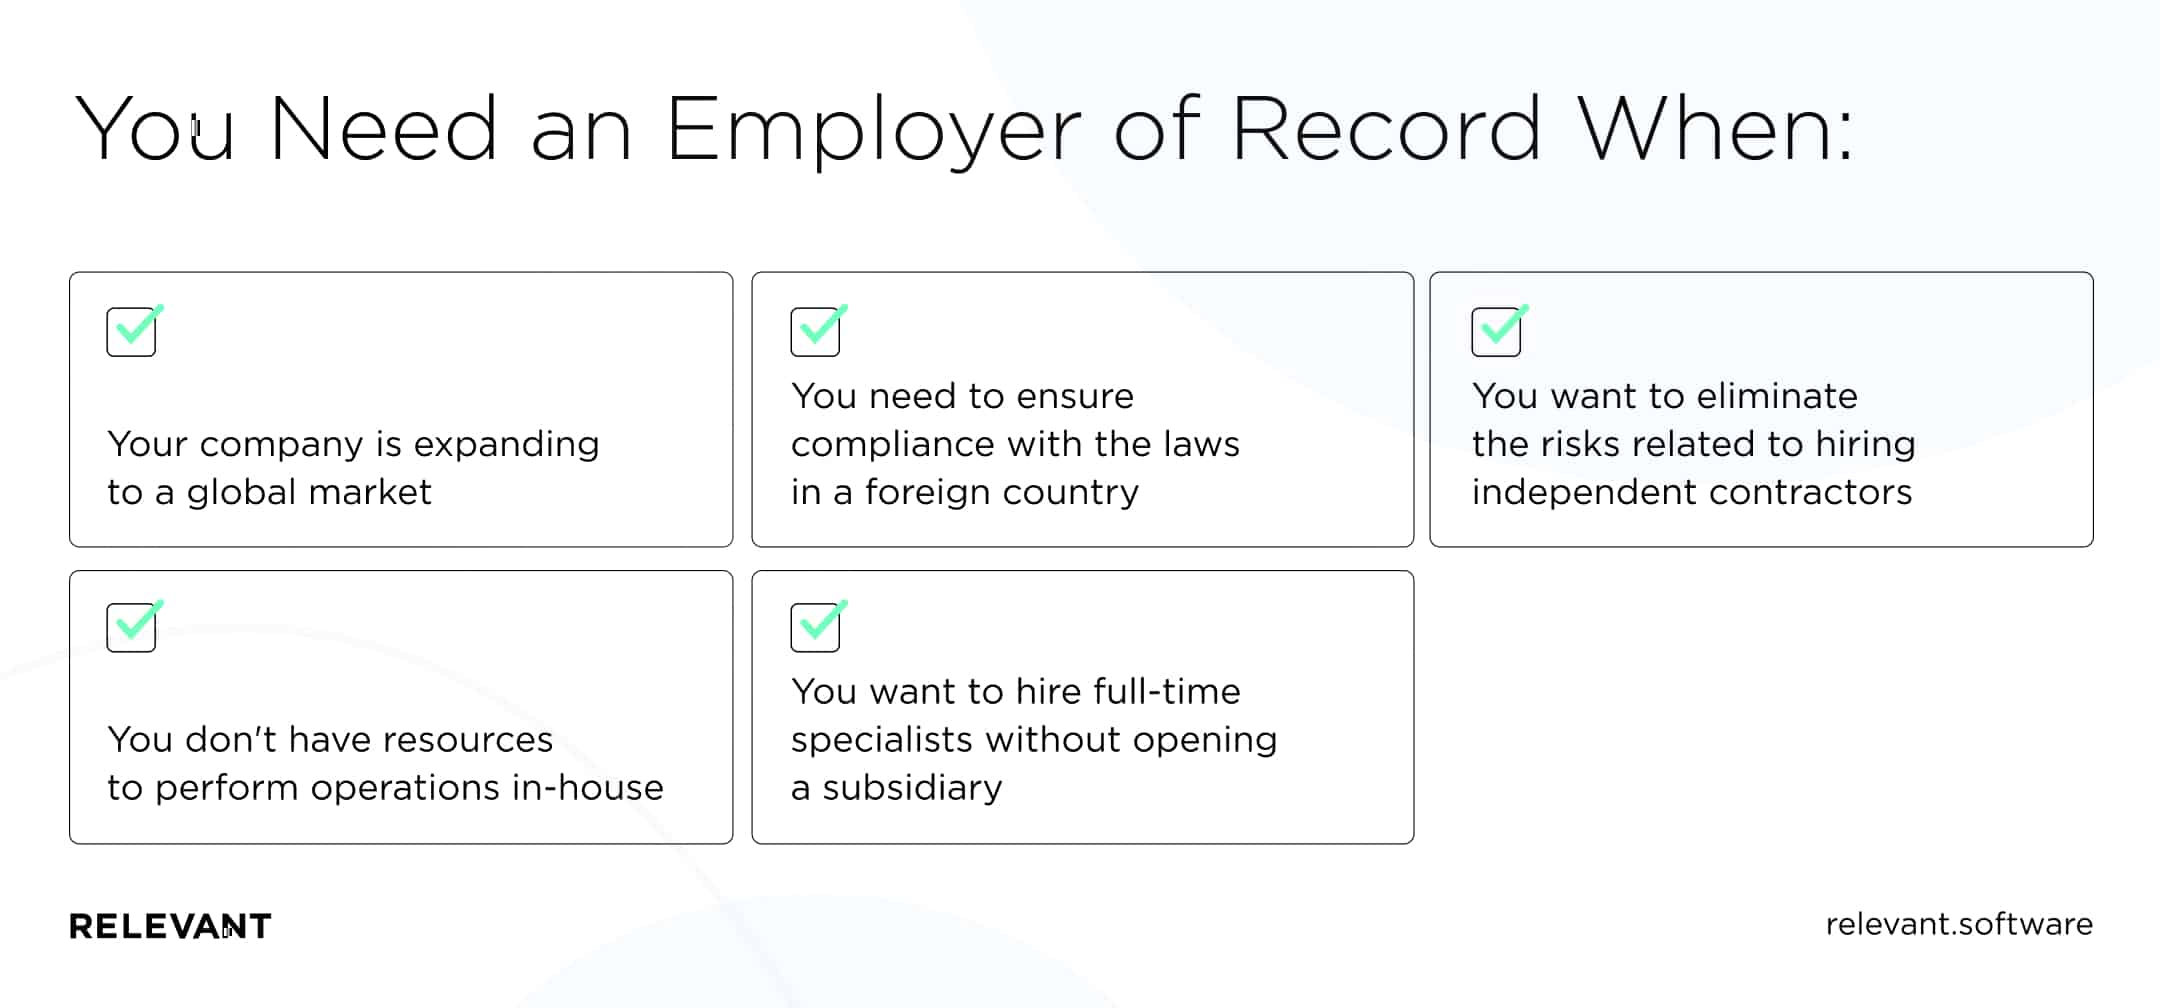 when you need an employer of record